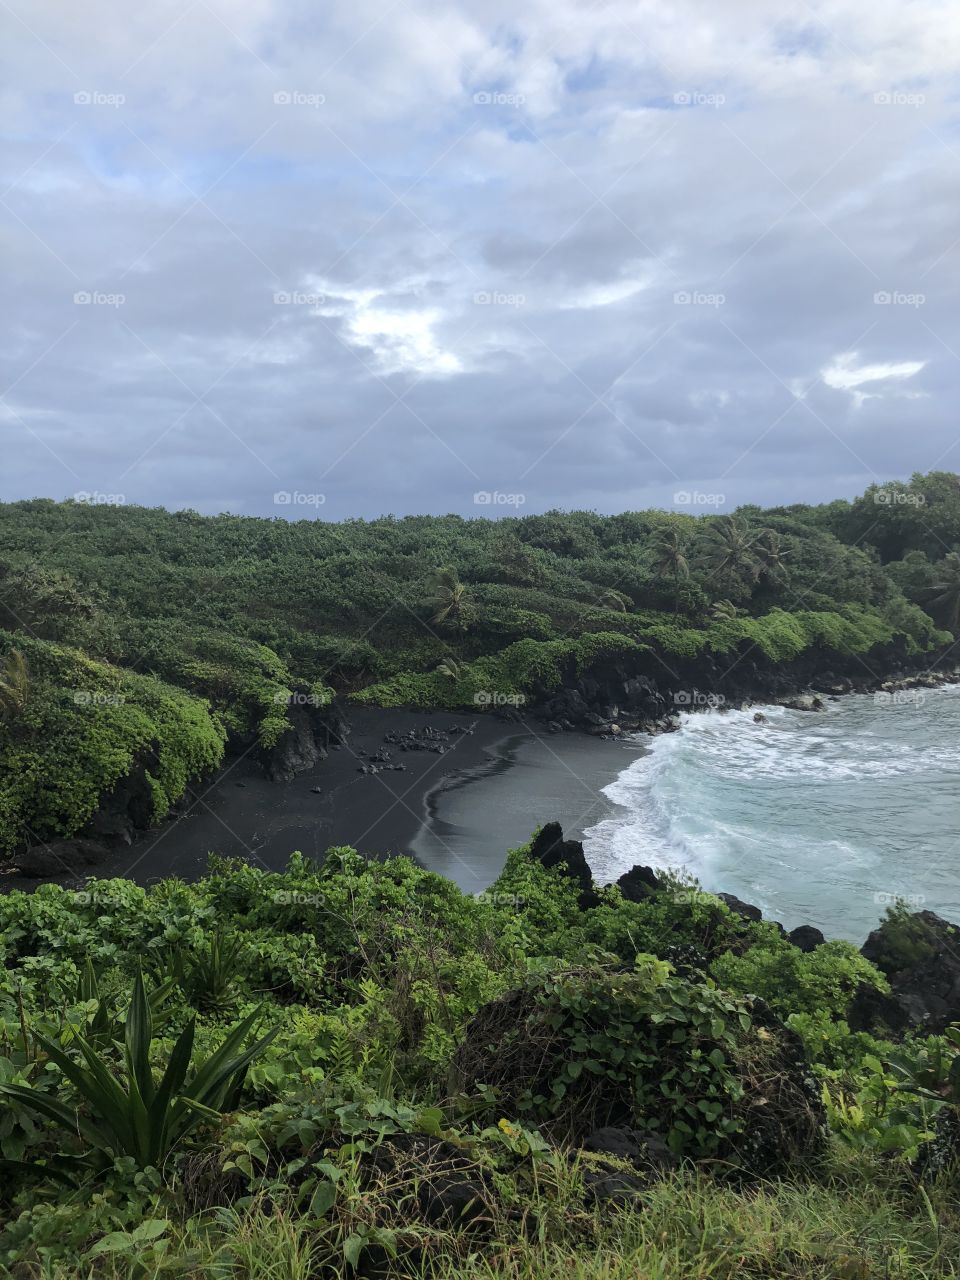 A must-see on Maui’s eastern shore: Black Sand Beach.